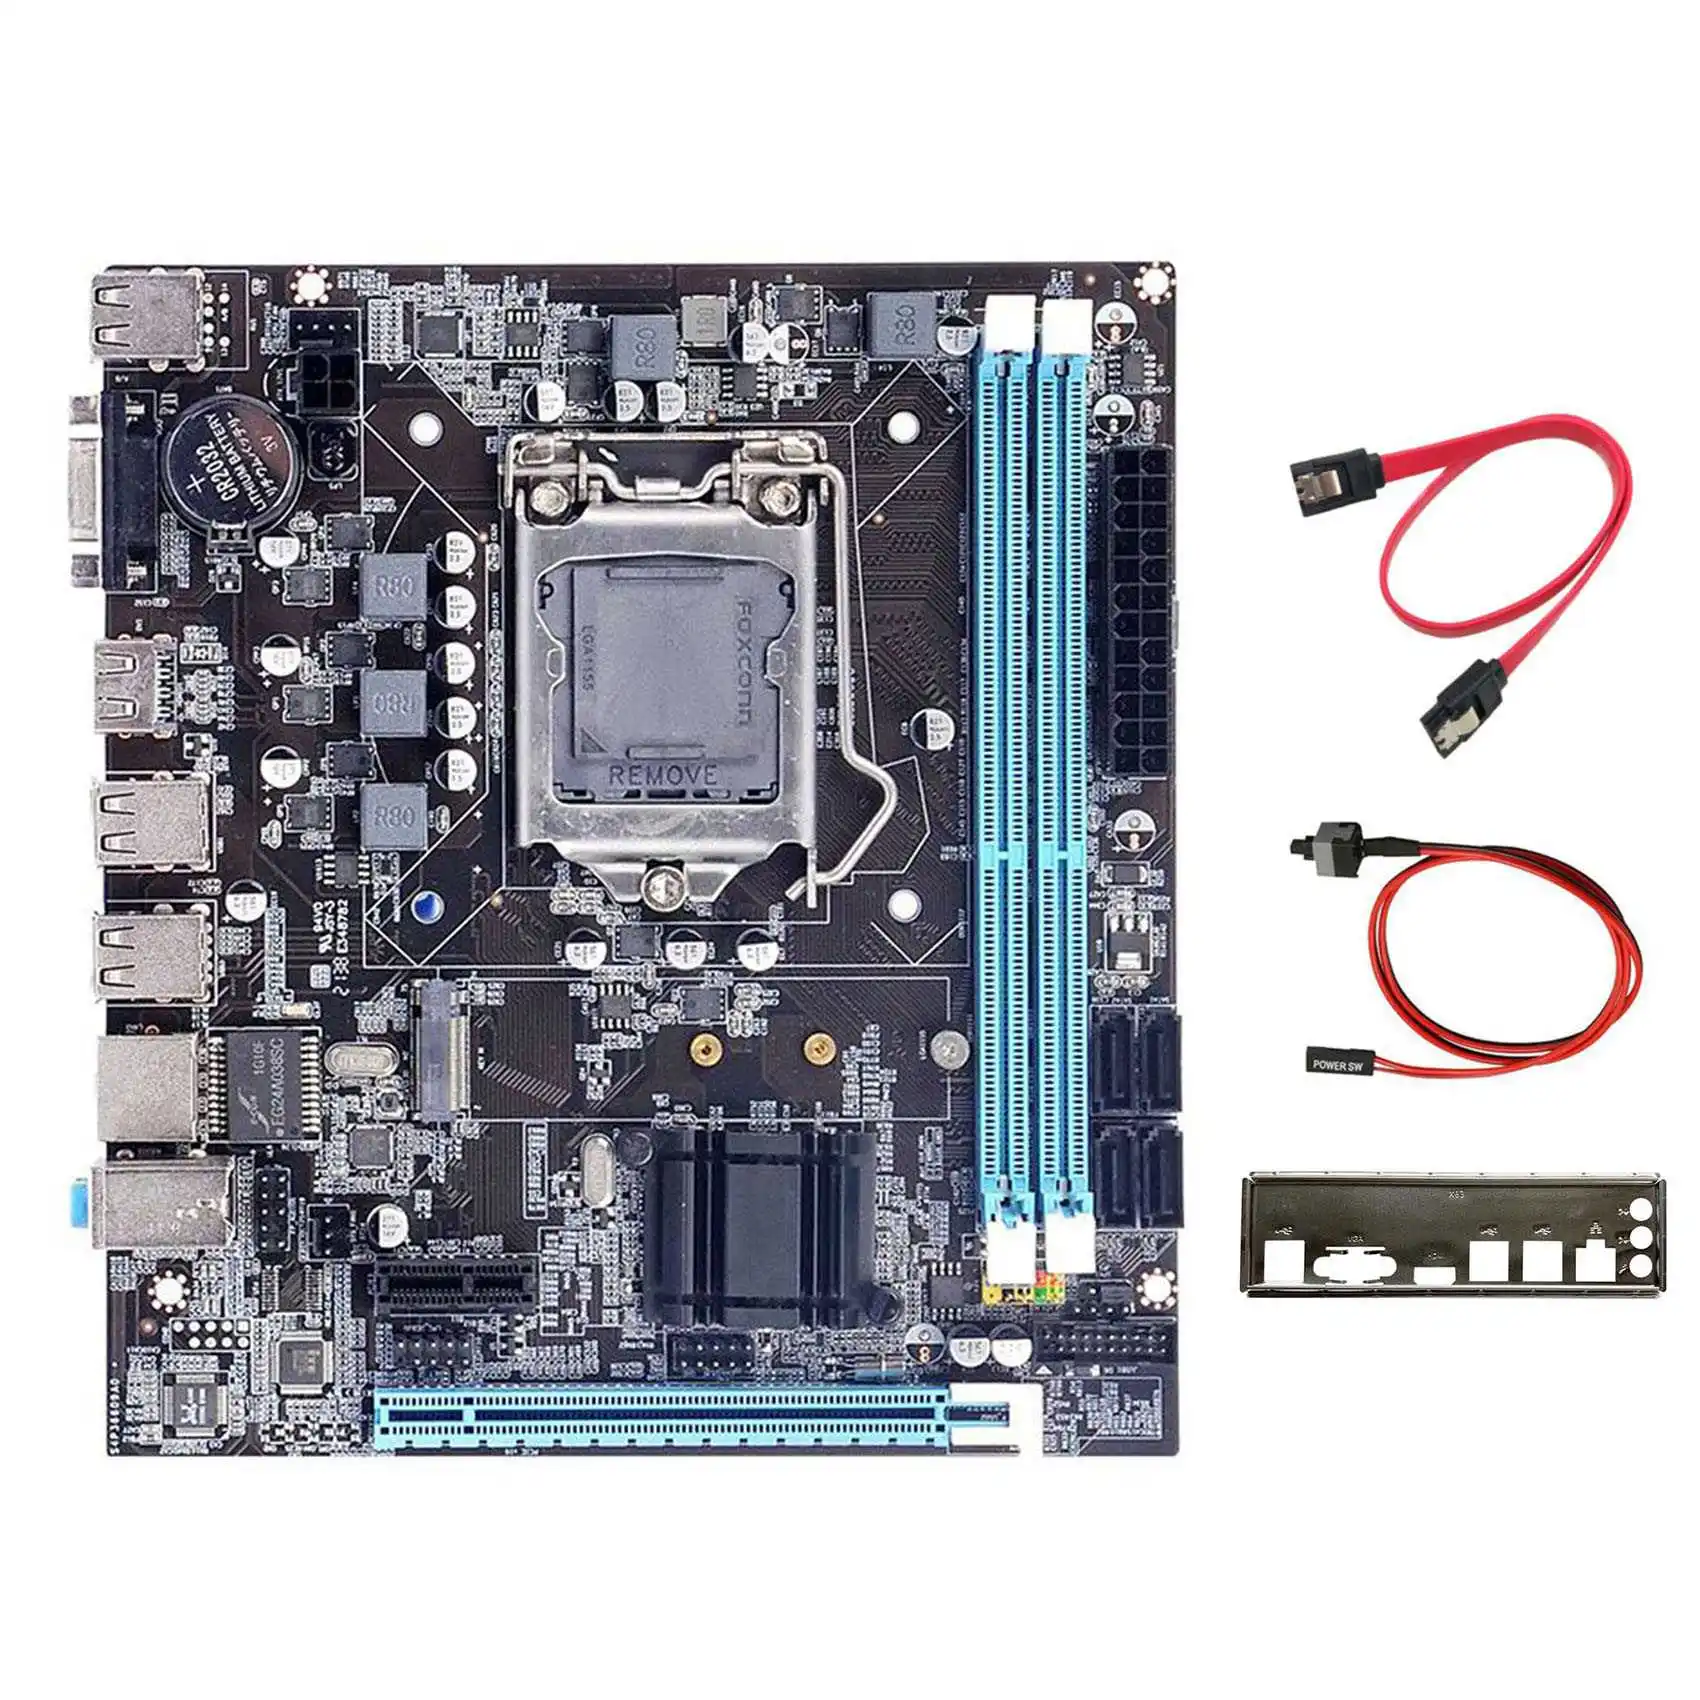 

H61 Motherboard+SATA Cable+Switch Cable+Baffle LGA1155 M.2 NVME DDR3 PCIE 16X for Office for PUBG CF LOL Motherboard